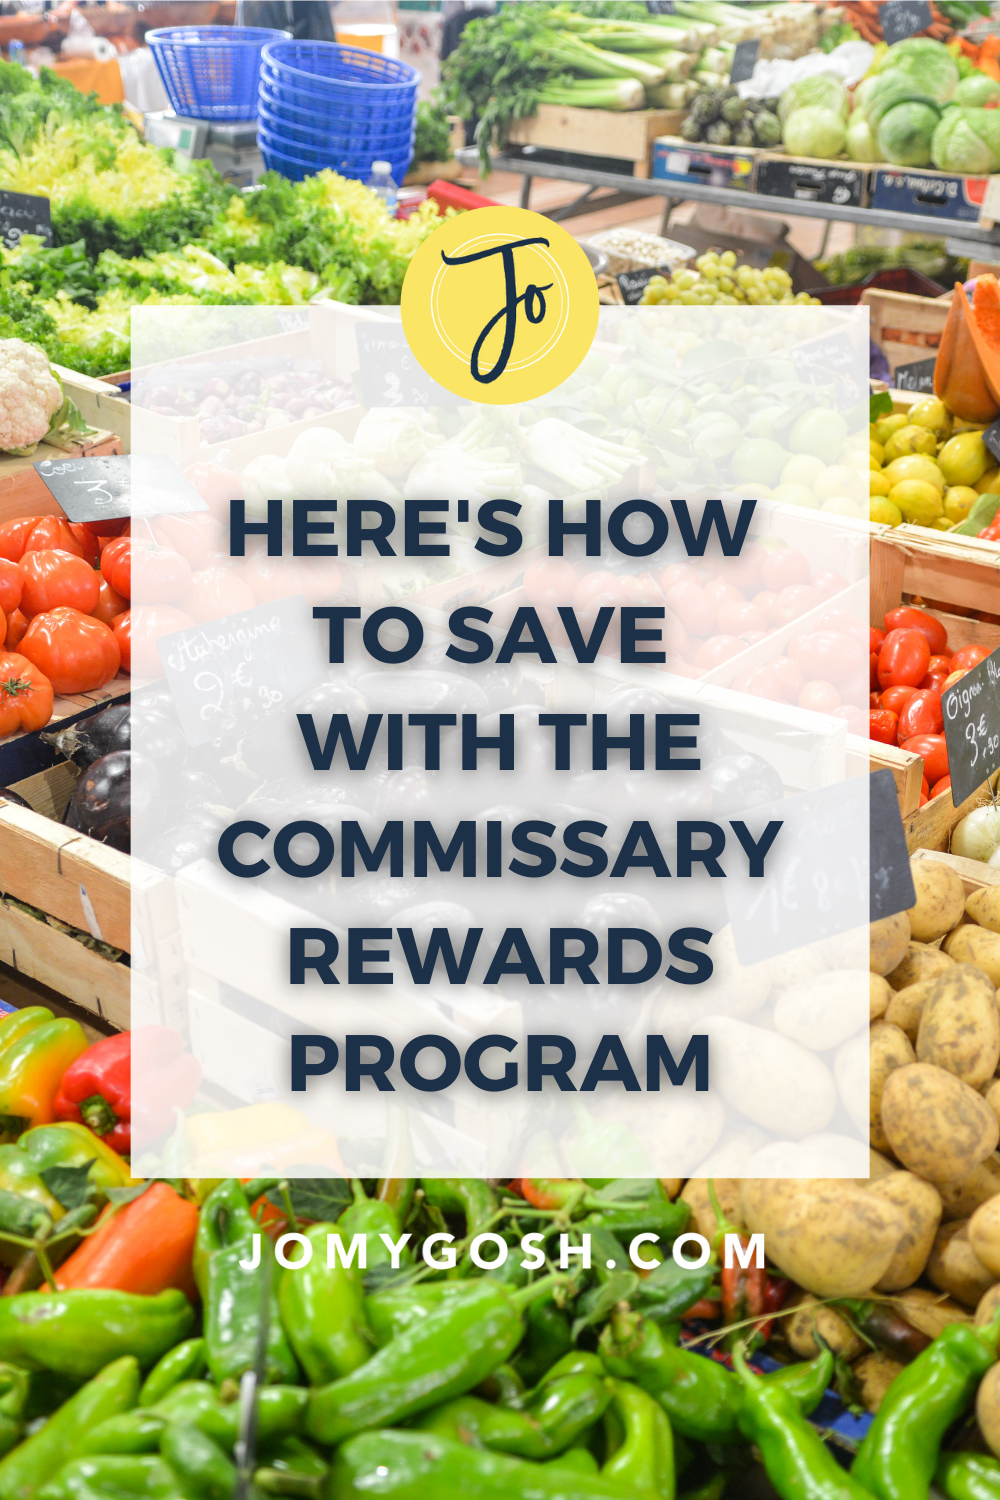 If shop at the Commissary but aren't using the rewards program, you could be missing out on savings and perks. 